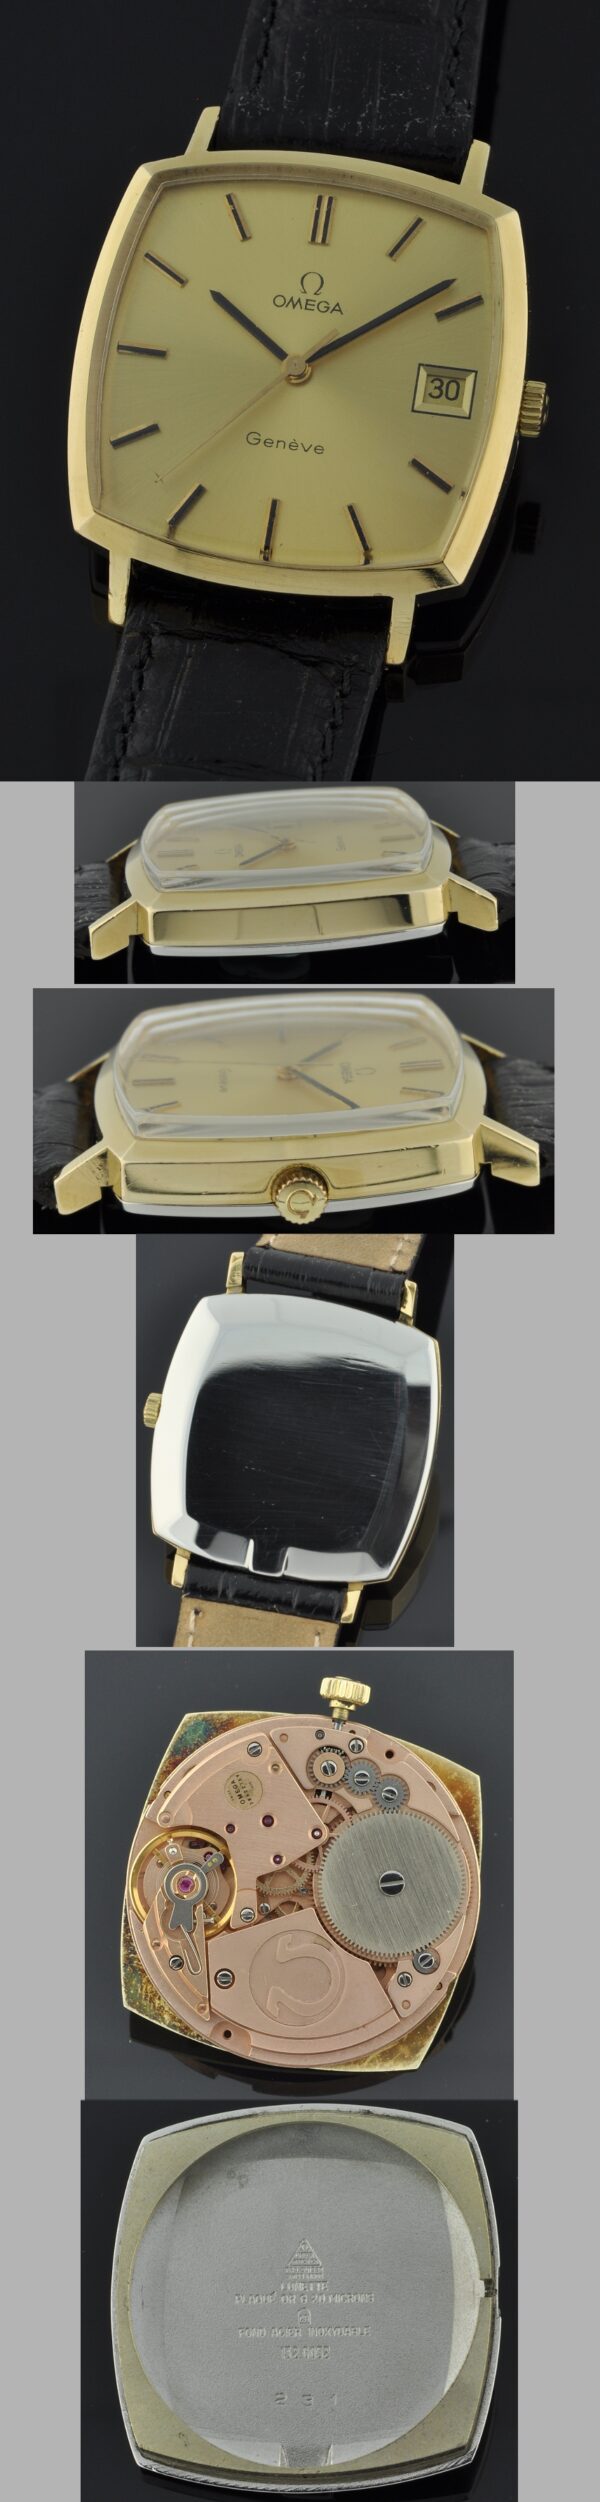 1974 Omega gold-plated watch with original television-shaped snap-back case, winding crown, dial, and cleaned automatic winding movement.